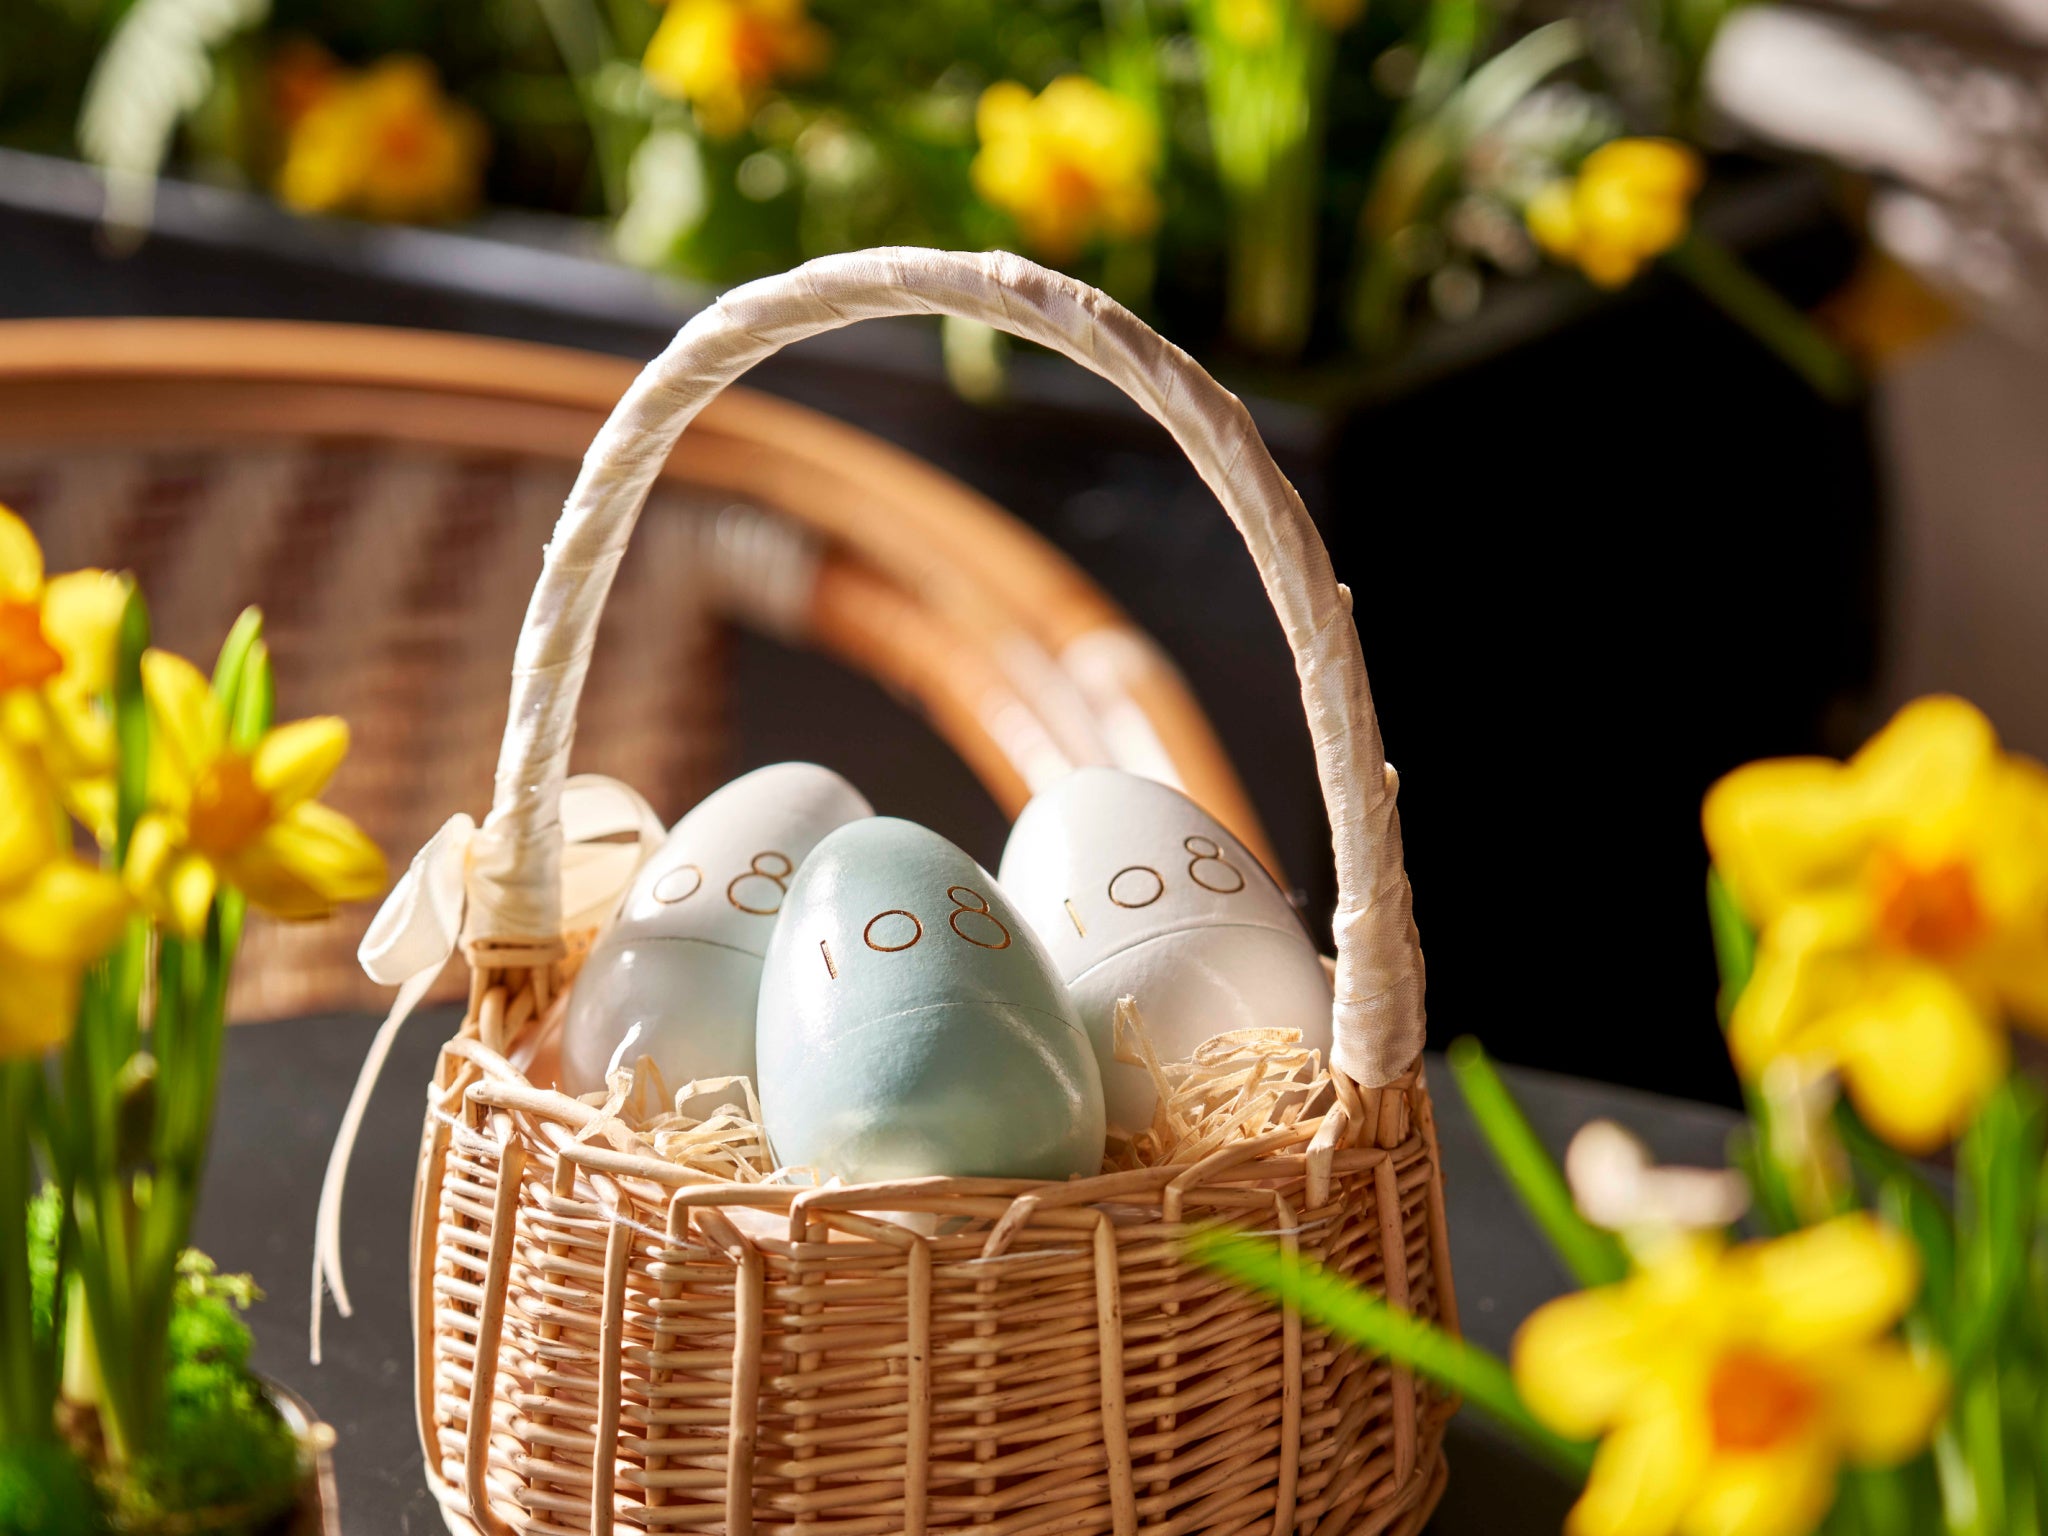 This easter egg hunt is one for the grown-ups